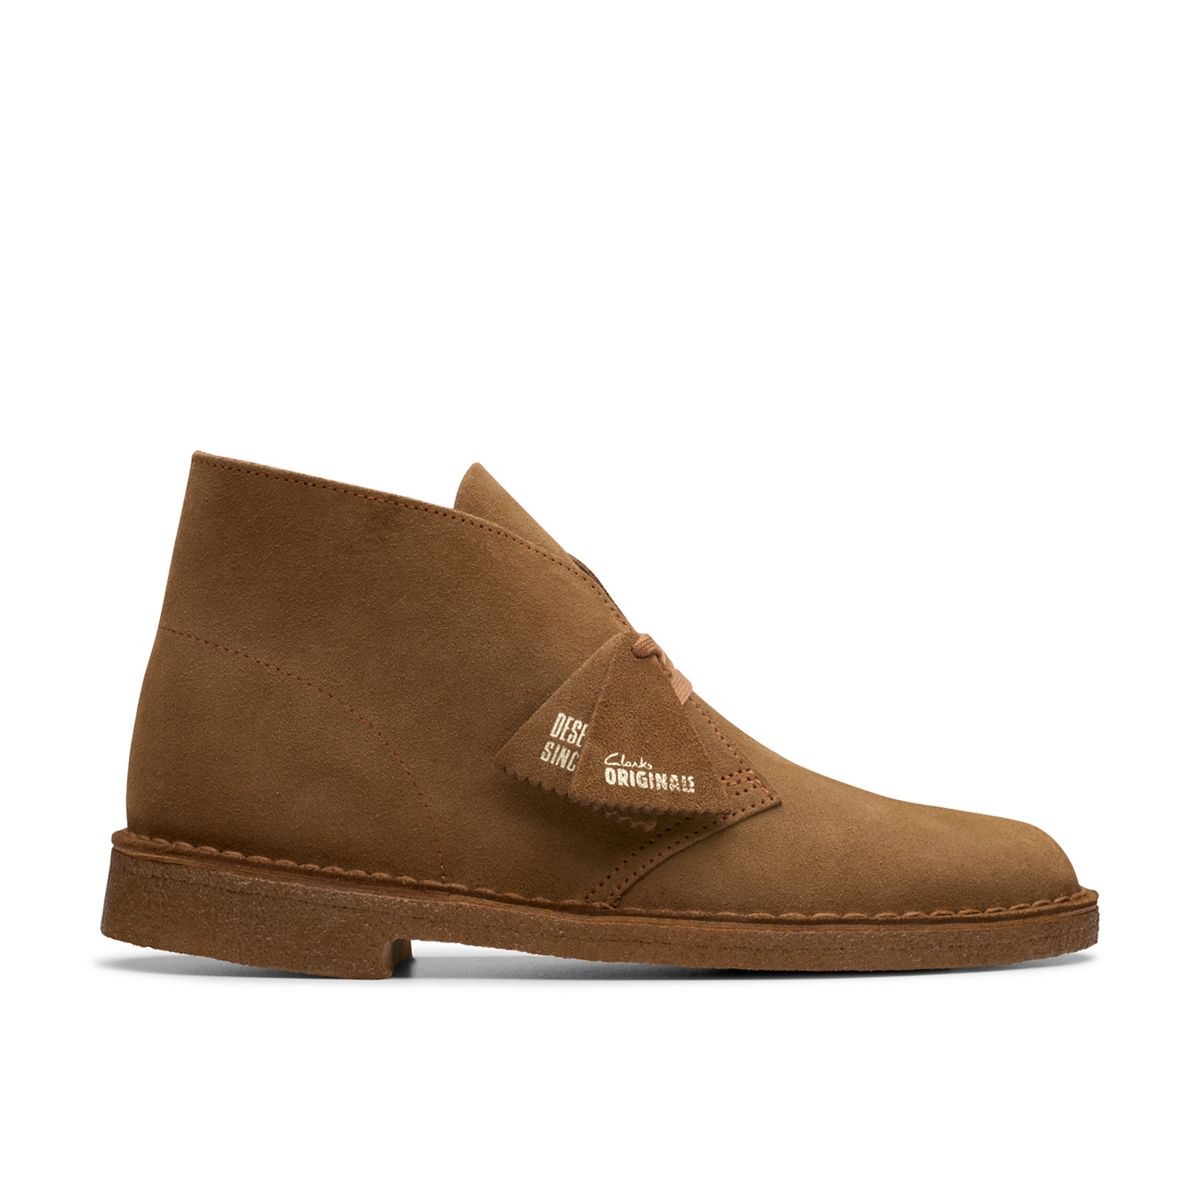 Anstændig Calamity Skygge Desert Boot Cola Suede - Clarks Canada Official Site | Clarks Shoes